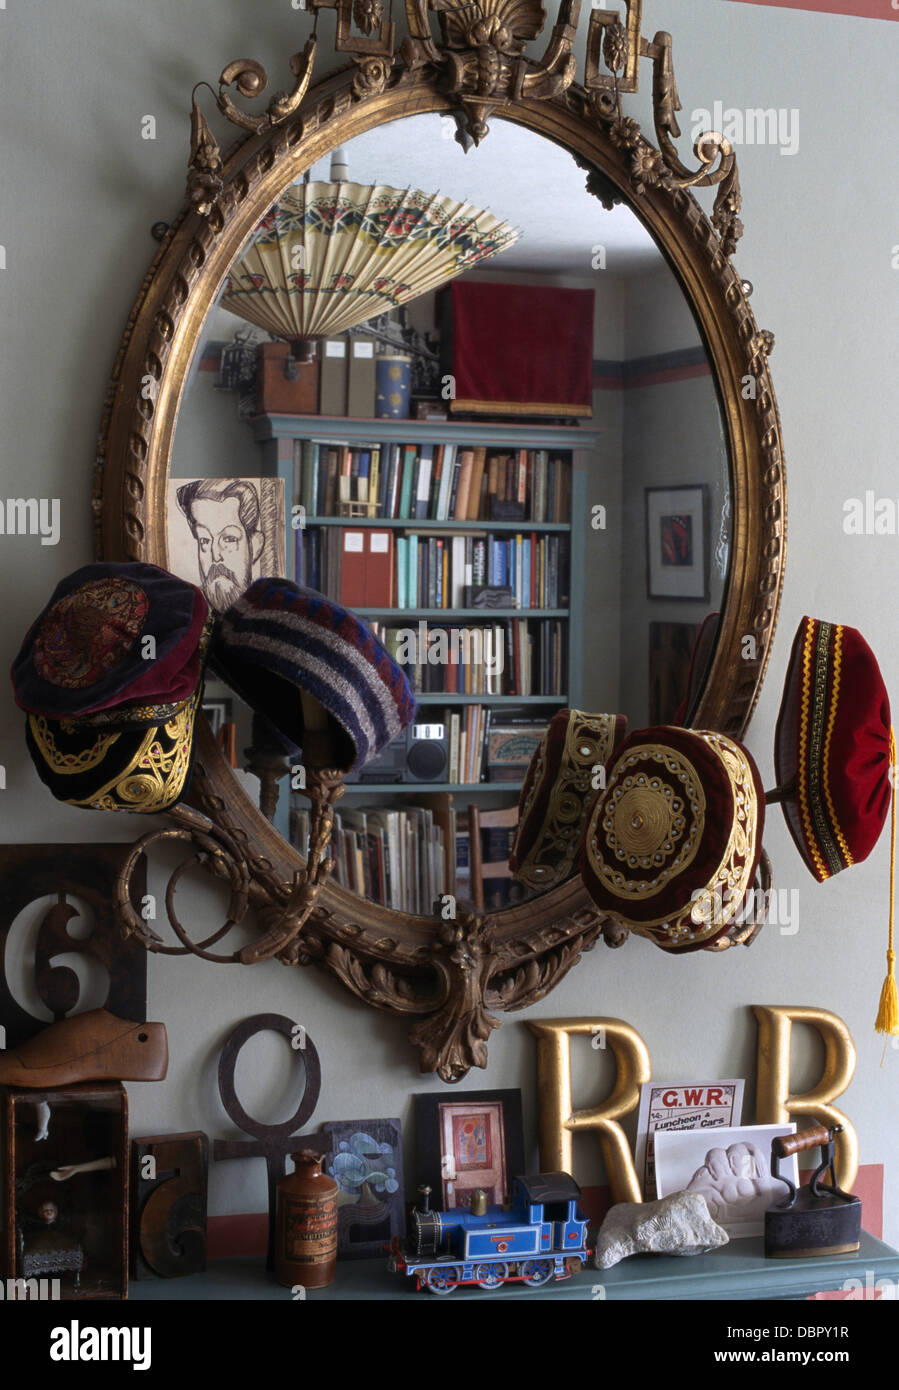 Close-up of antique girandole mirror with a collection of Muslim Taqiyah caps  above shelf with painted wooden letters Stock Photo